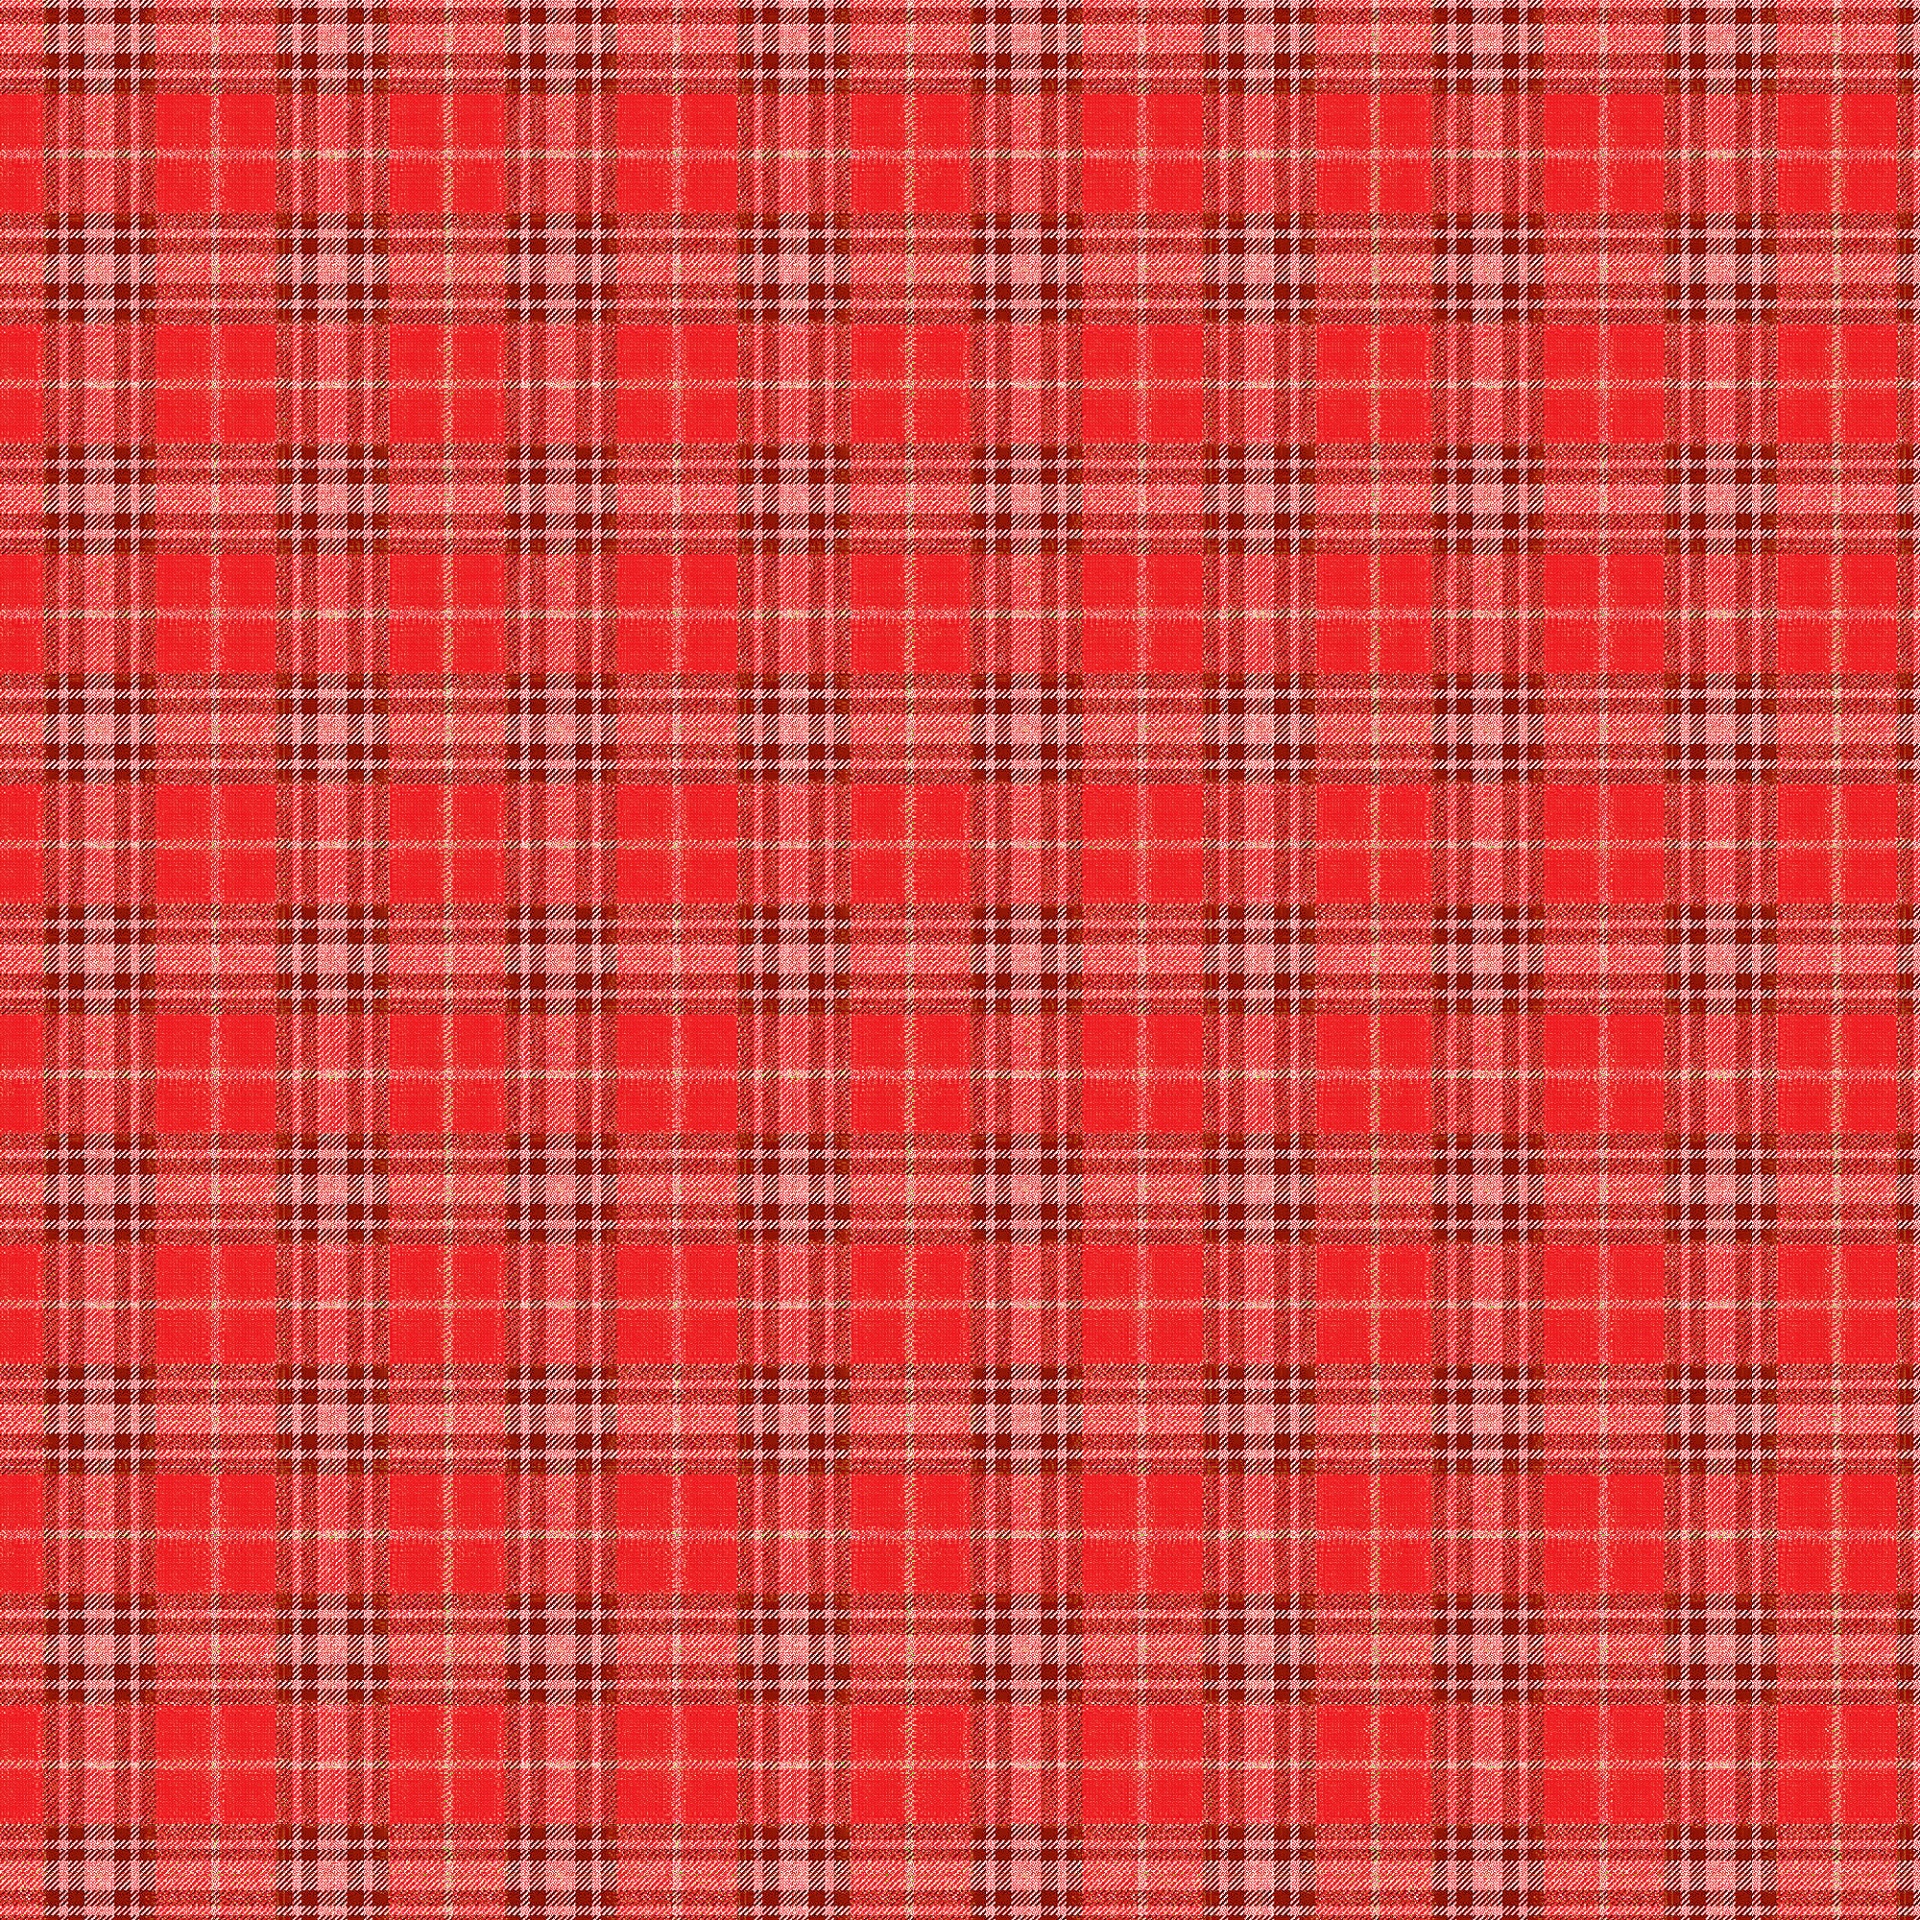 Checkered tablecloth red